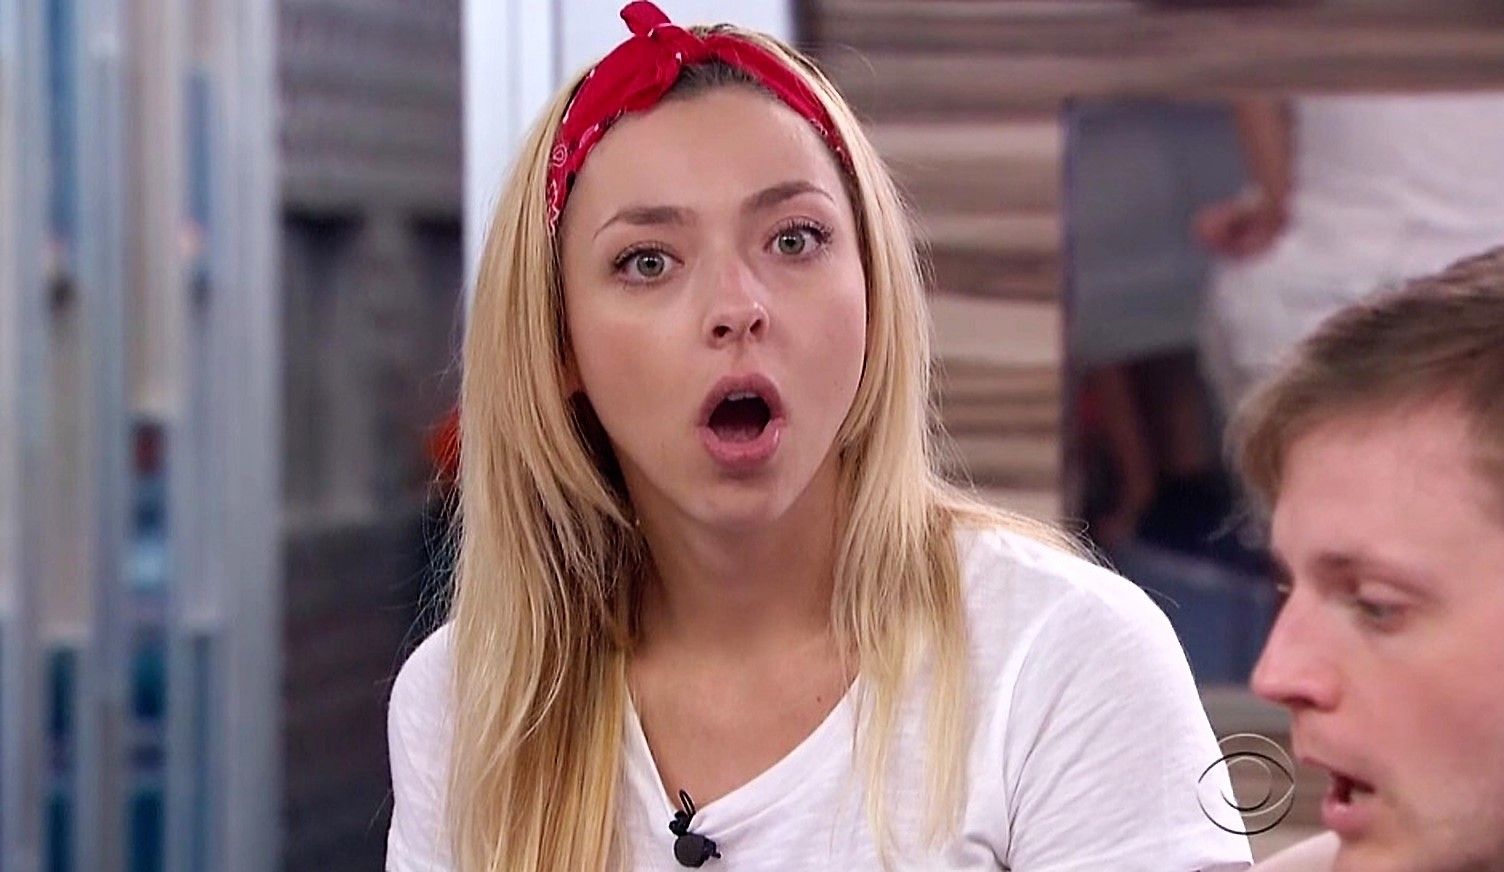 Liz Nolan from Big Brother wearing a red bandana and white shirt, mouth agape.